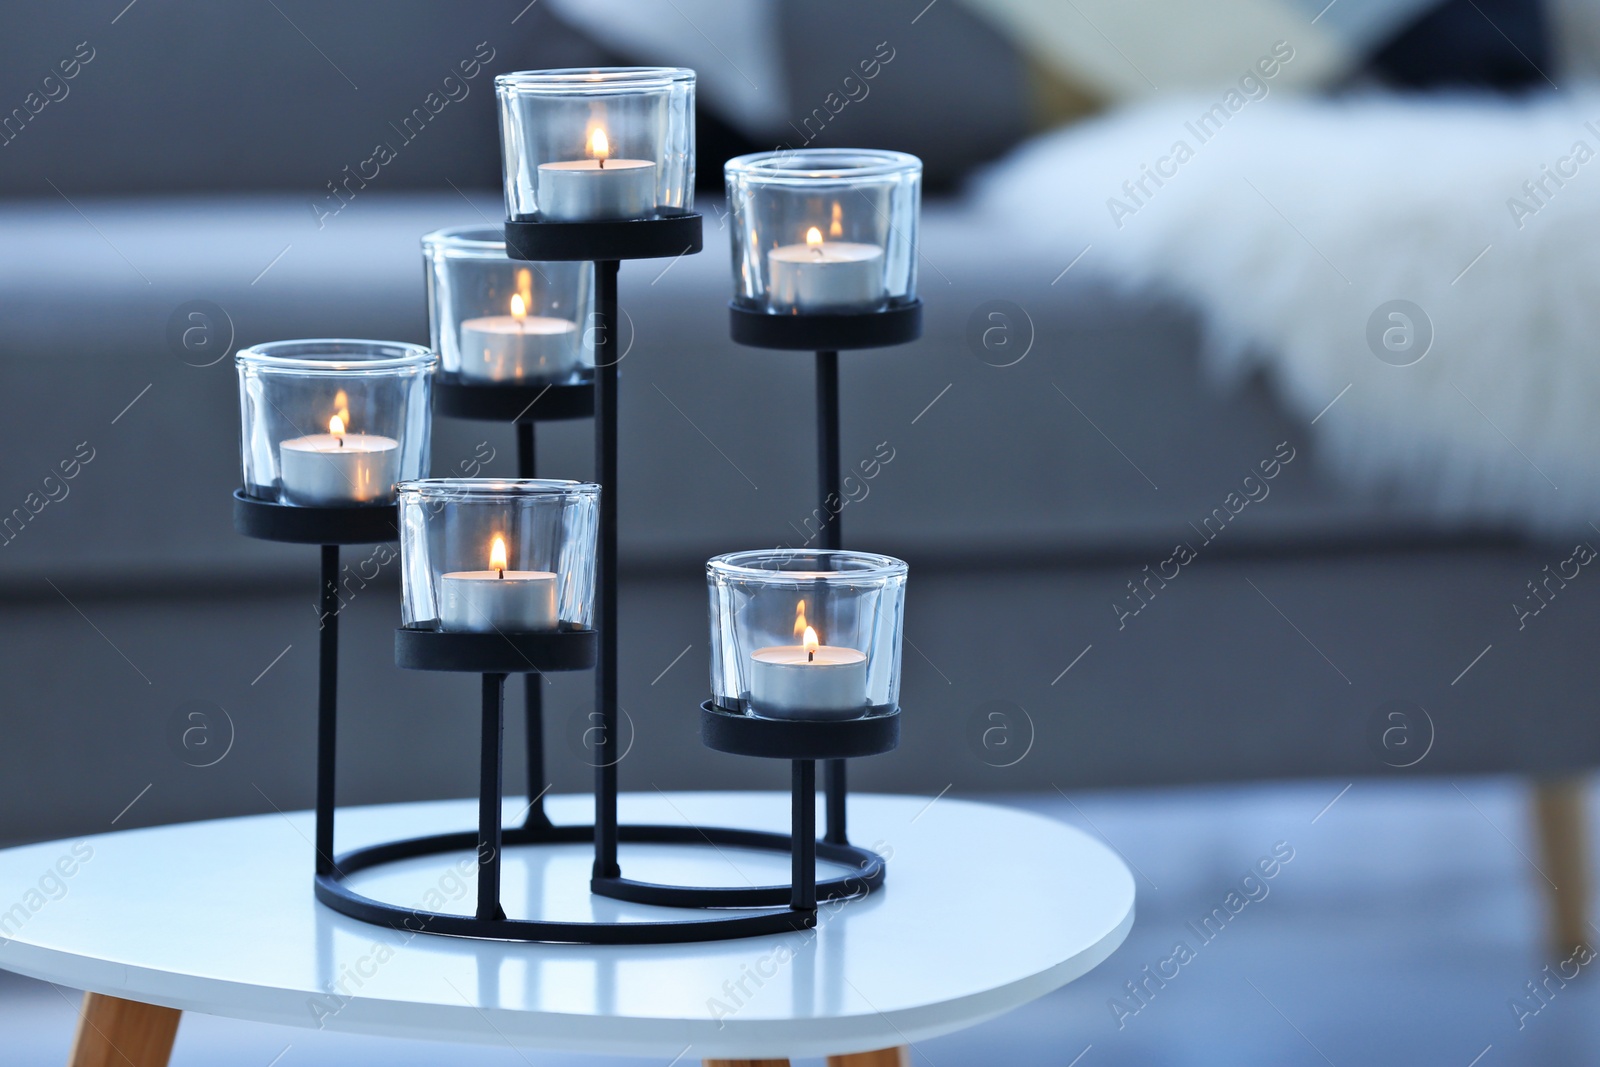 Photo of Burning candles on table against blurred background